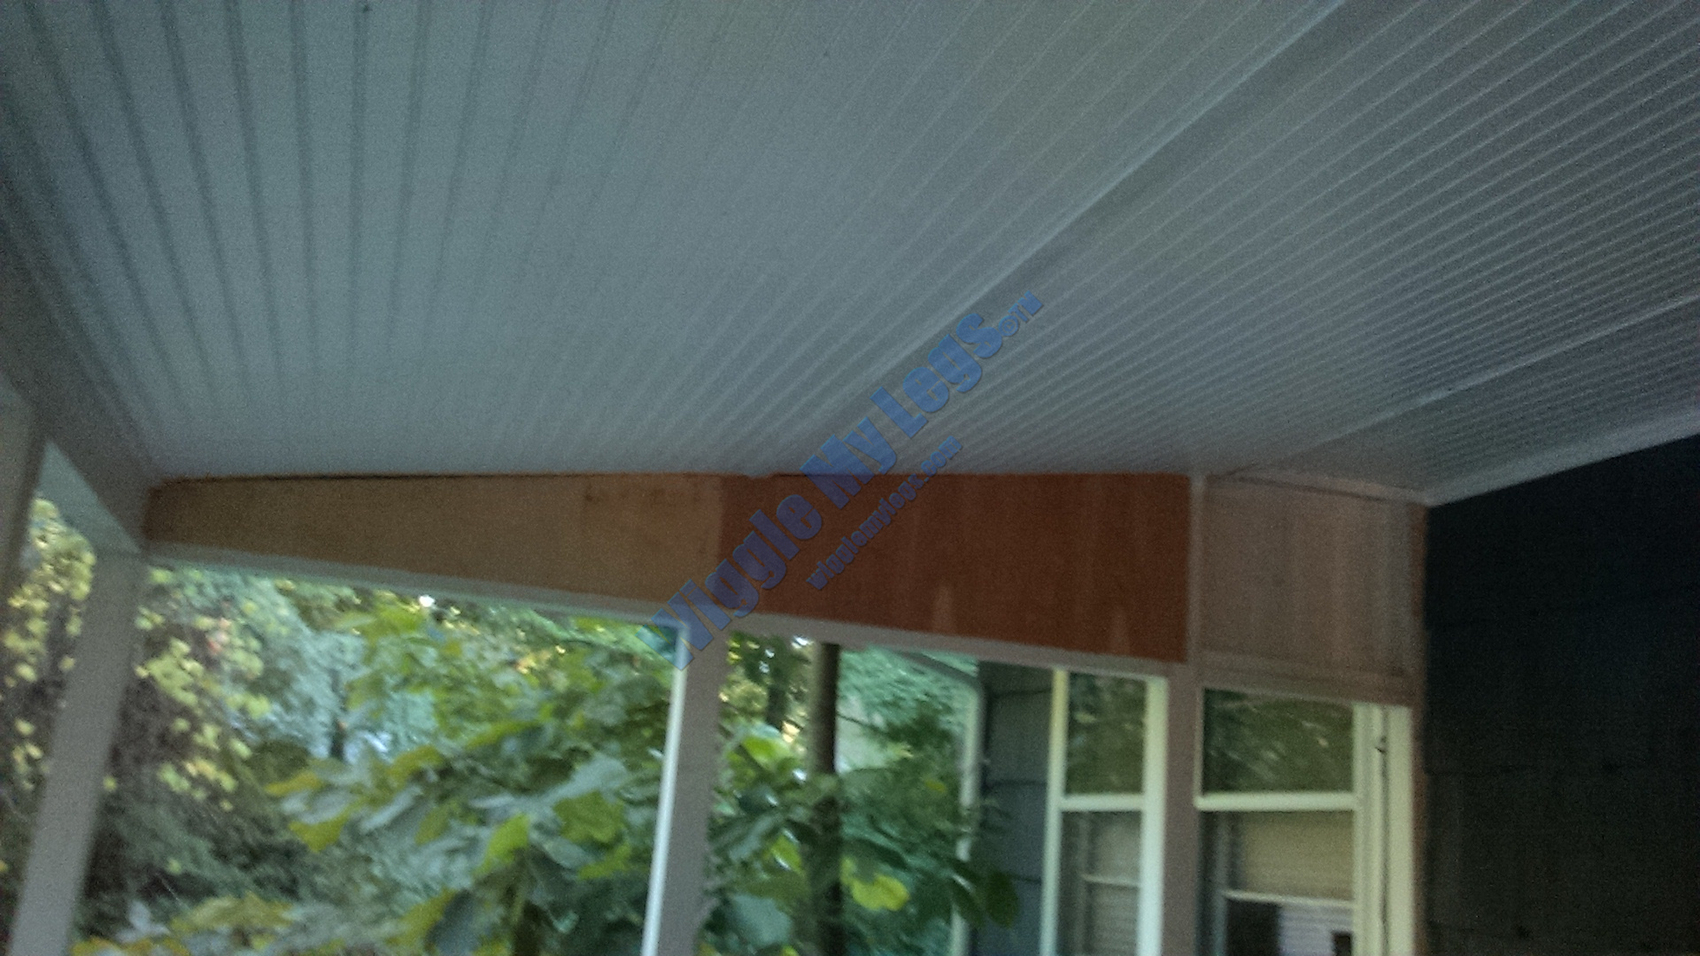 Showing two of three plywood panels installed on one end of deck interior.